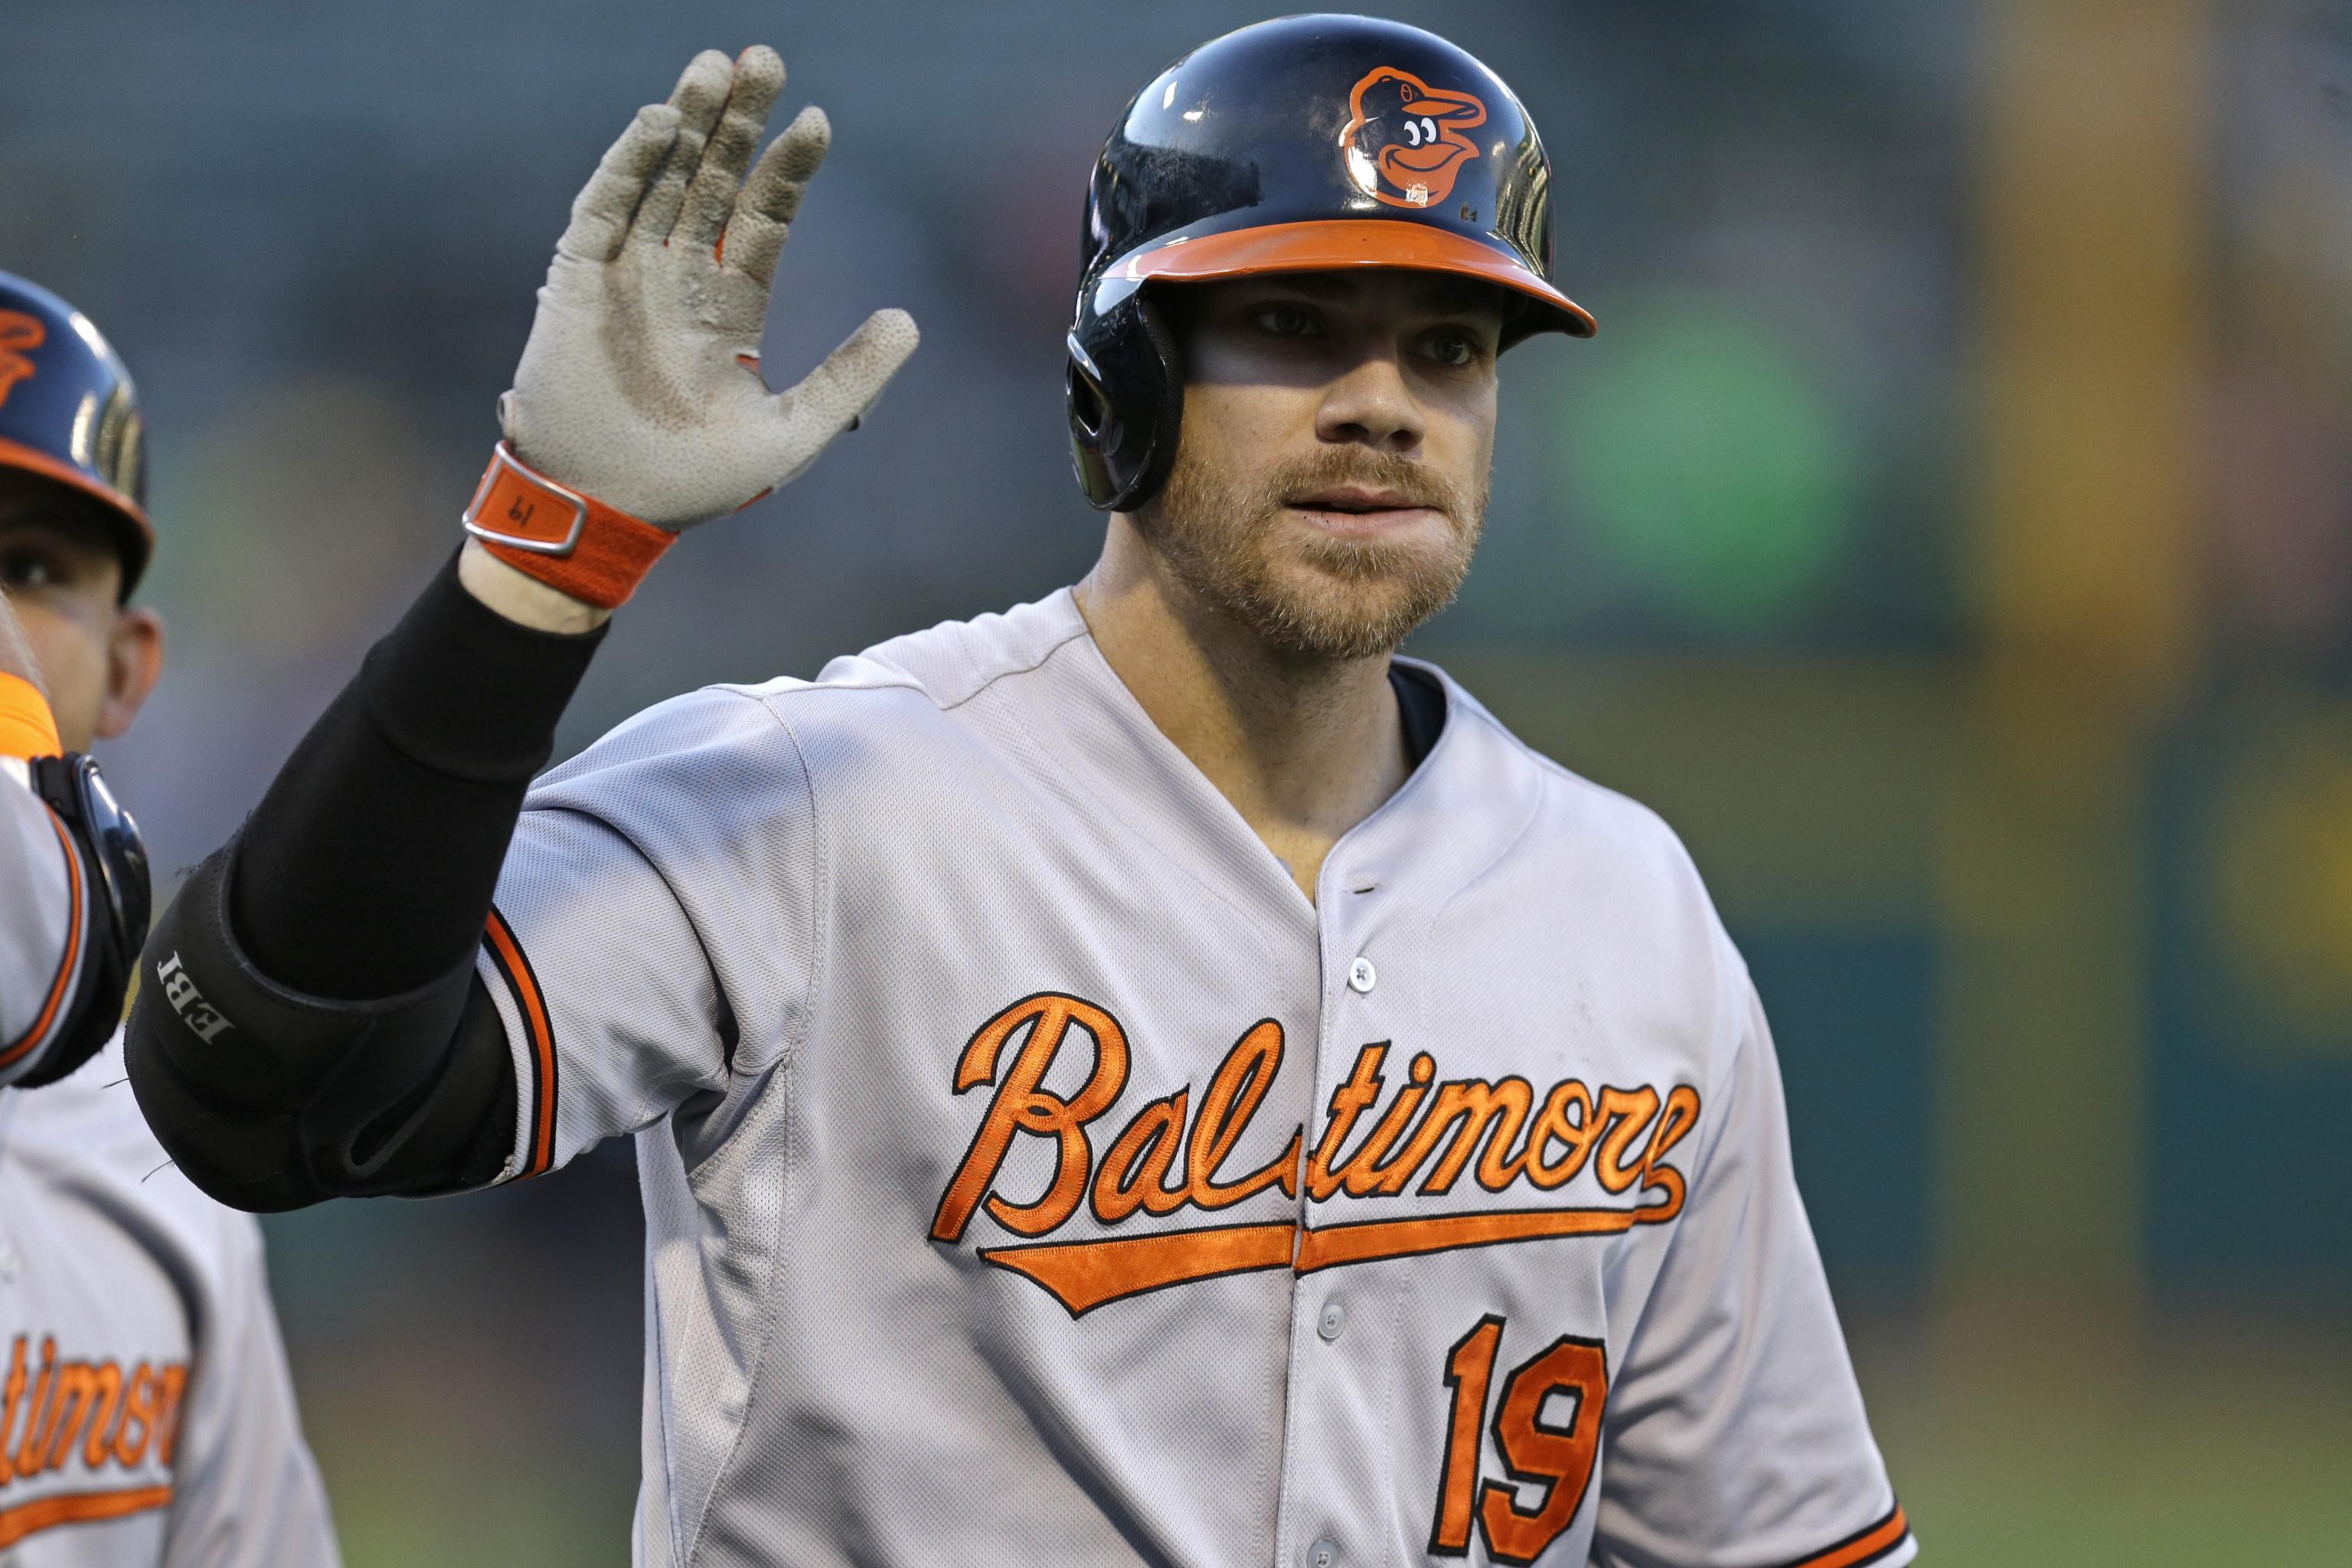 From 53 Home Runs to 25 Games: Orioles' Chris Davis Latest to Open